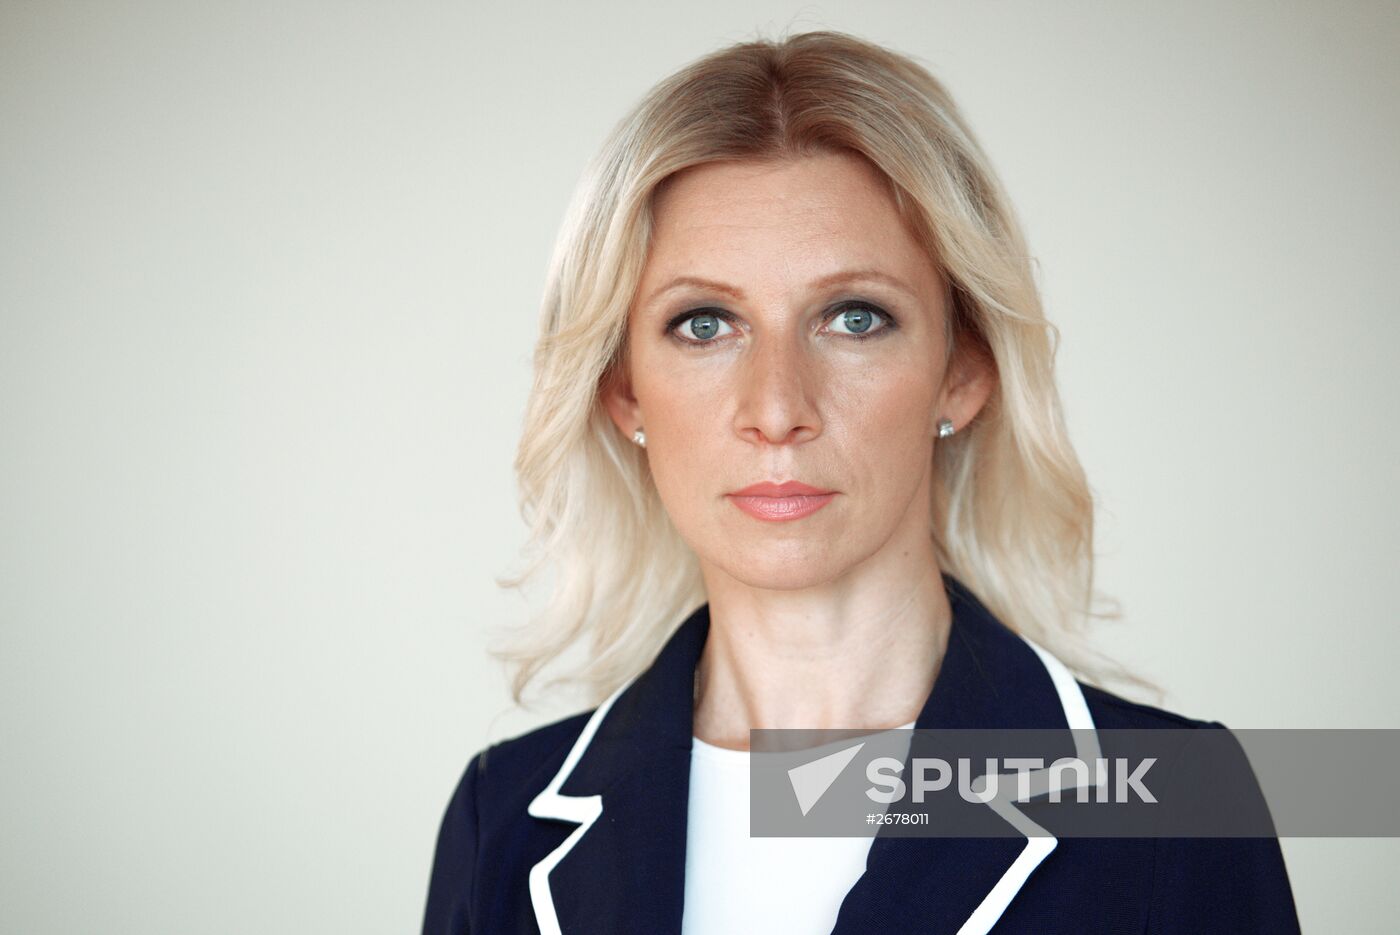 Newly appointed representative of Russia's Foreign Affairs Ministry Maria Zakharova